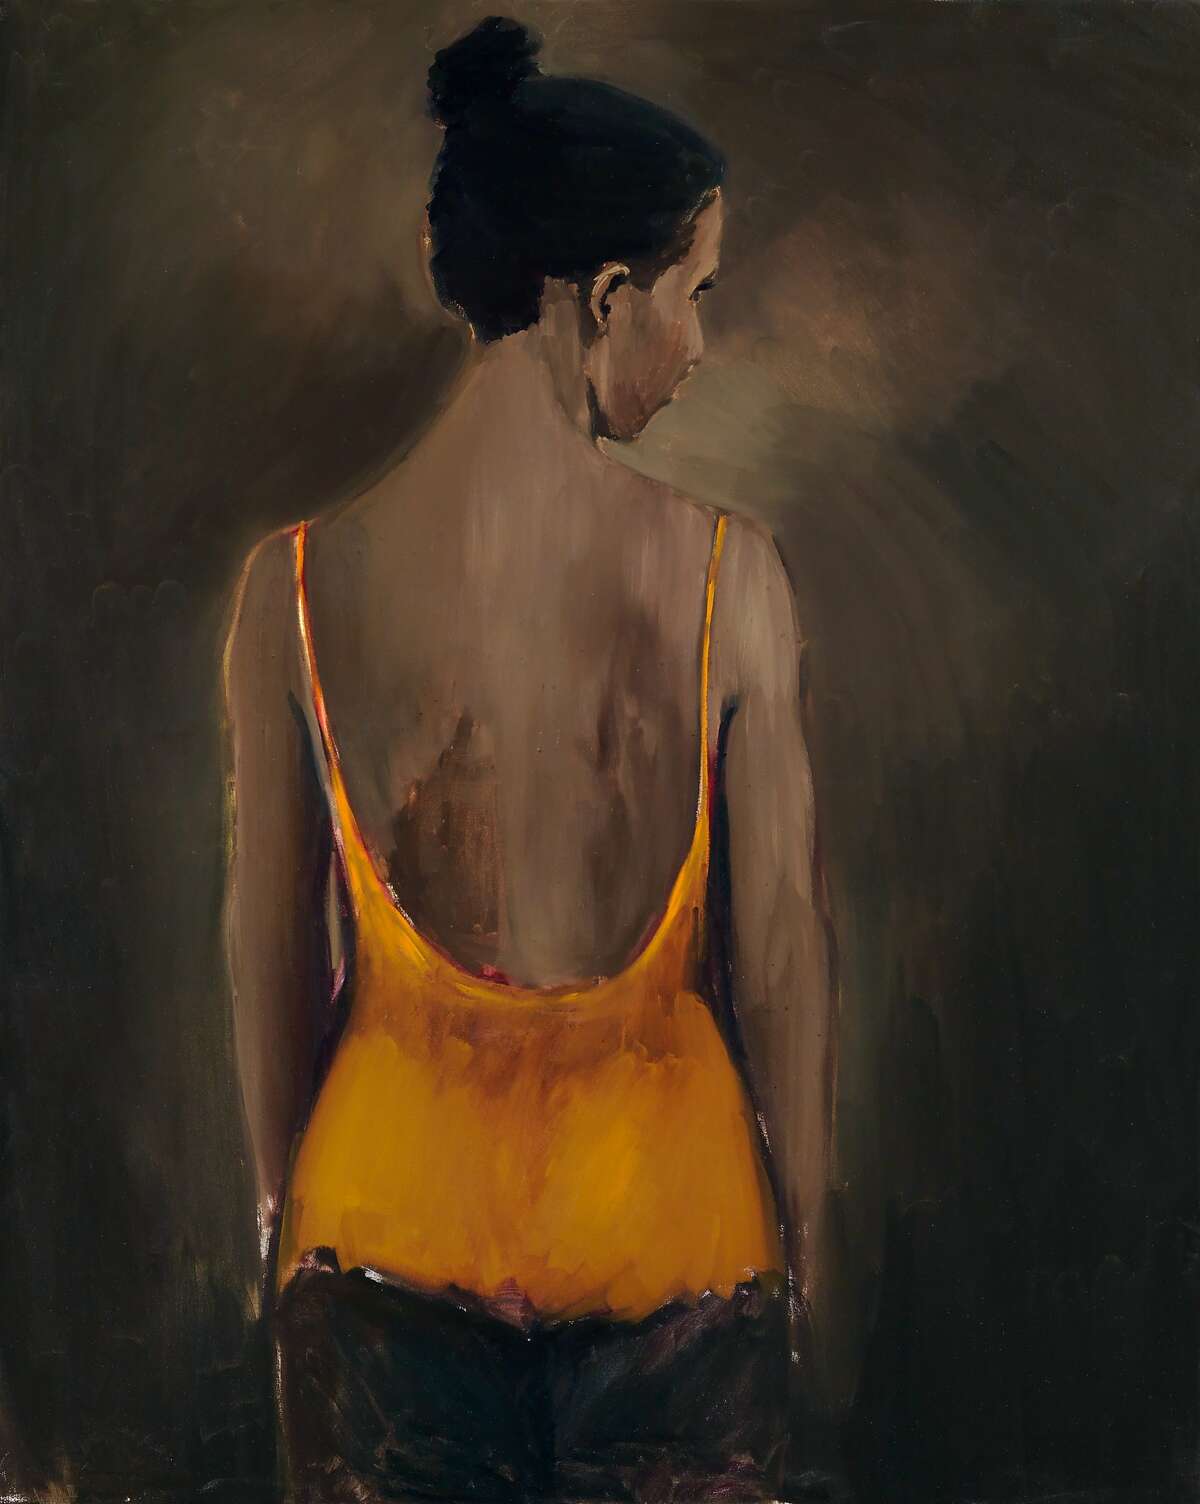 Lynette Yiadom-Boakye, "Places to Love For" (2013)